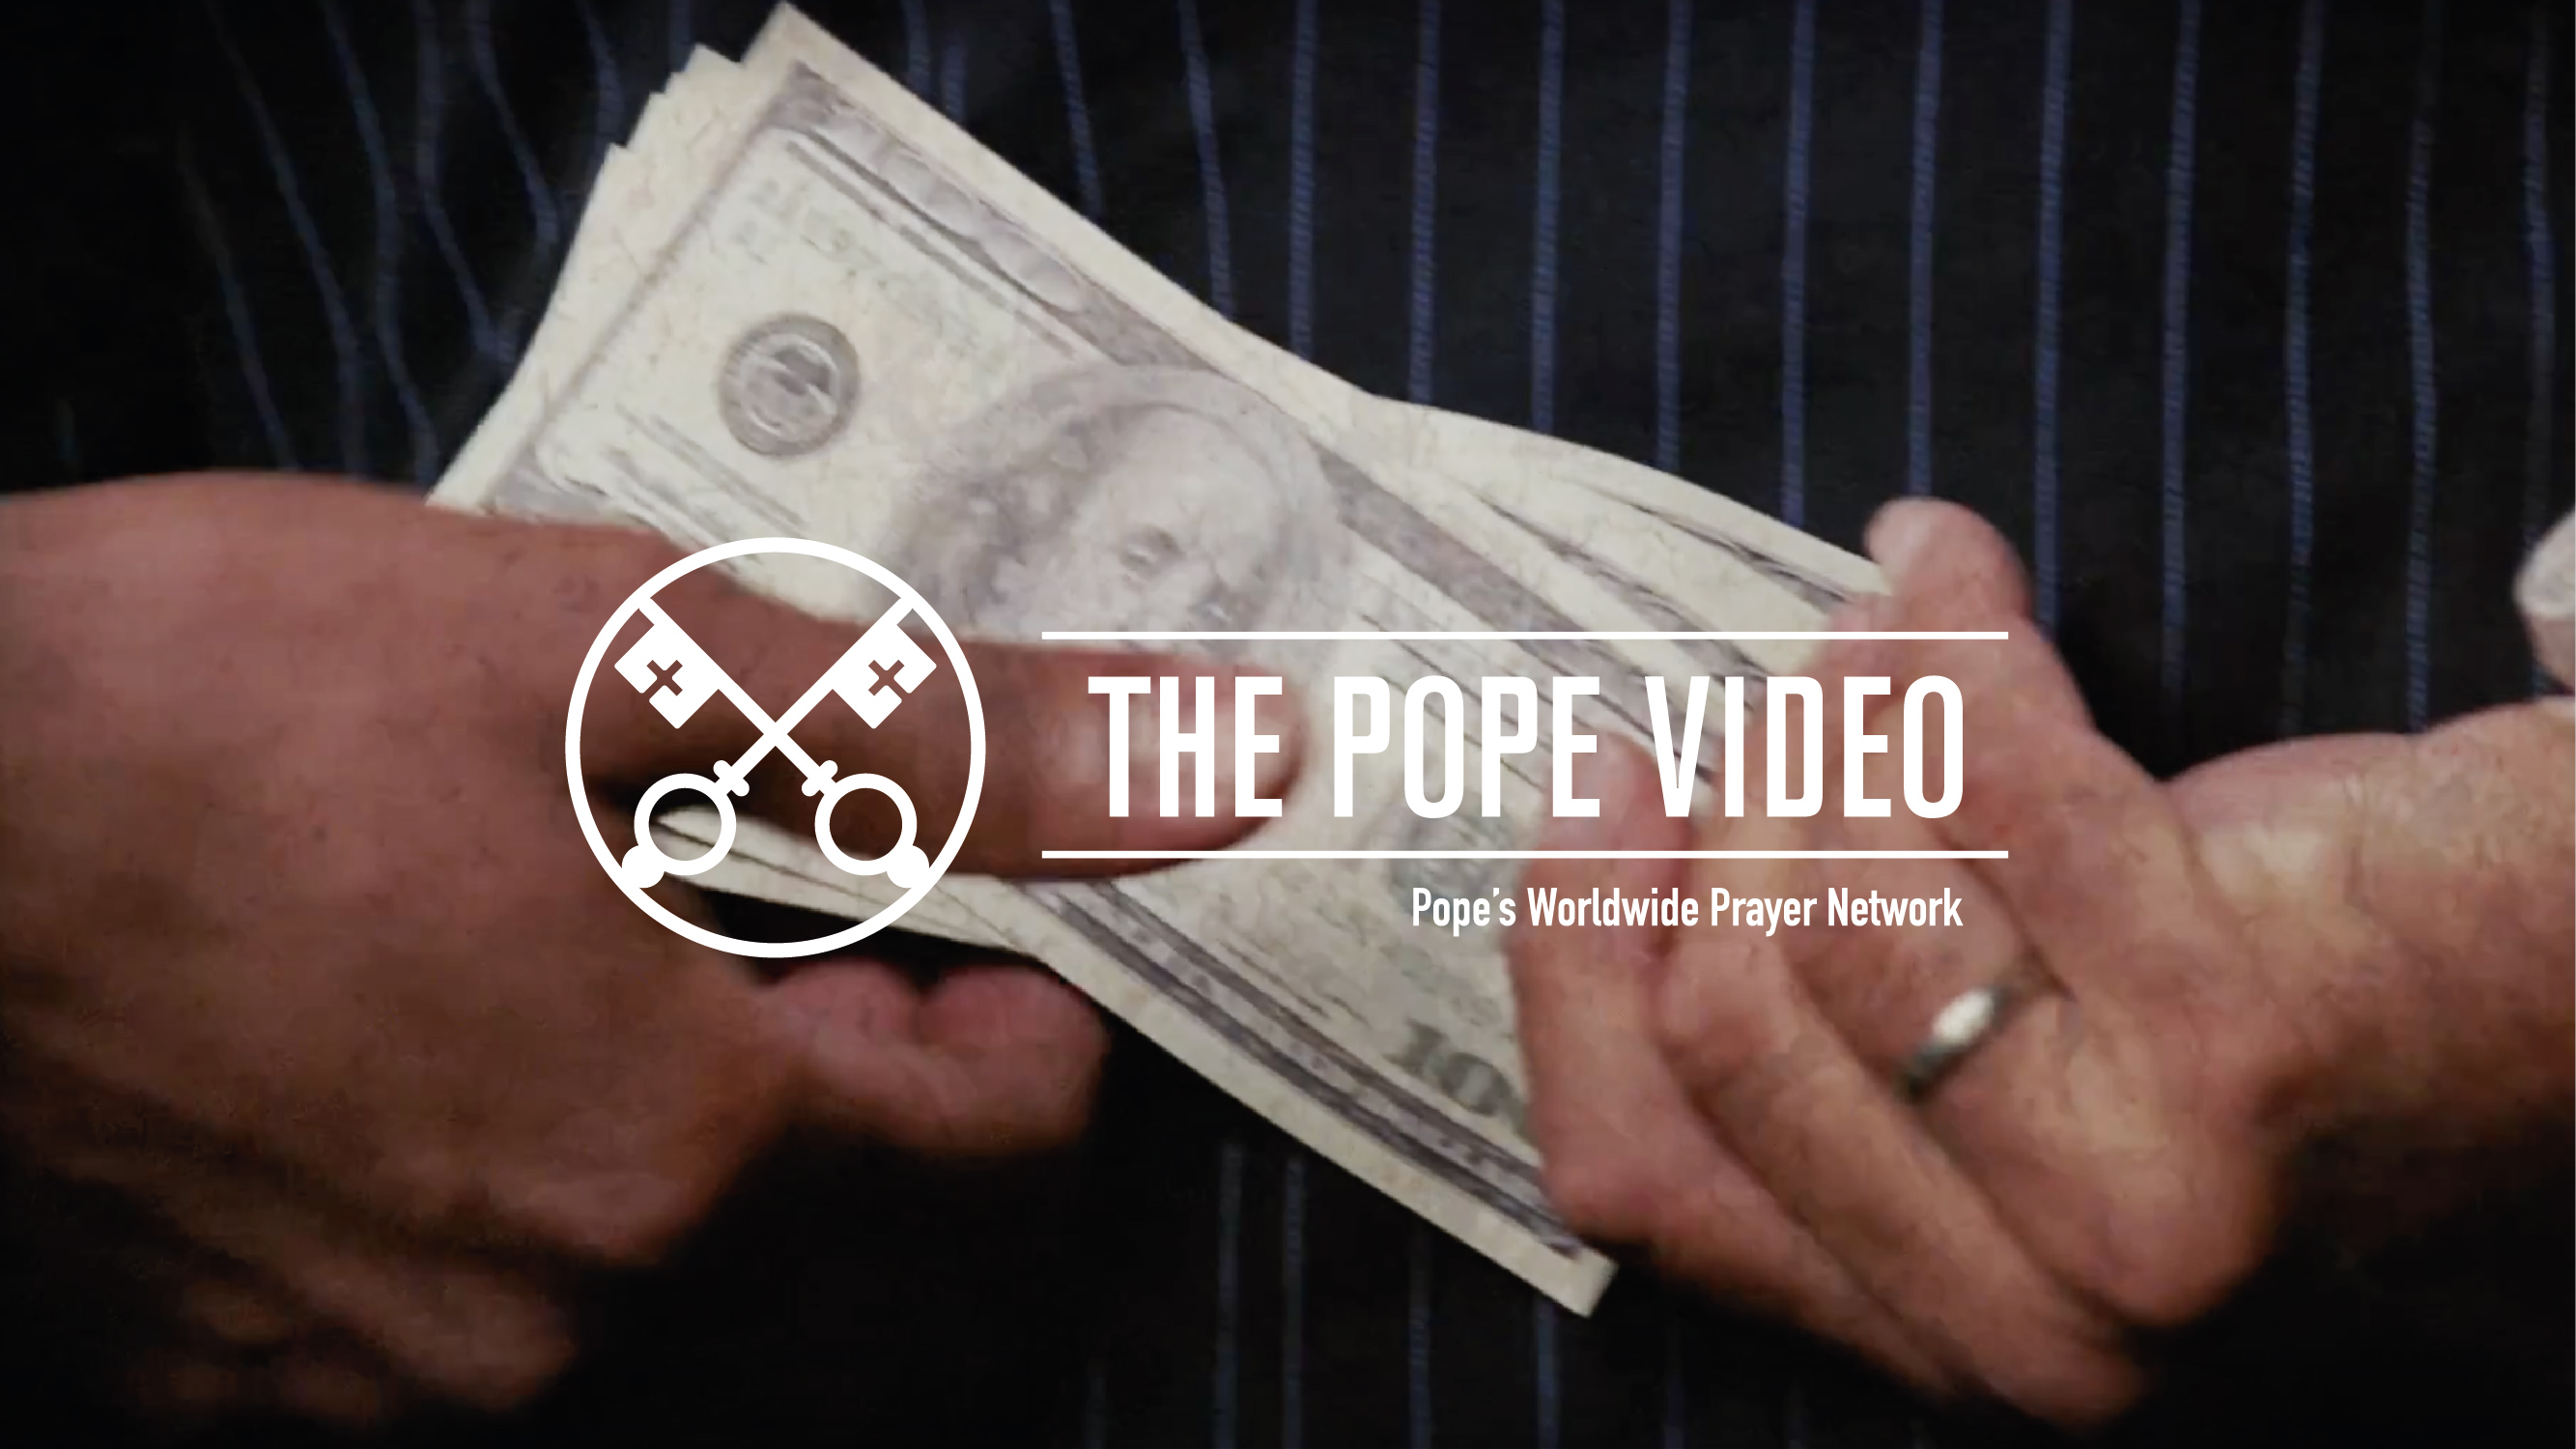 The Pope Video February 2018 (Official Image)